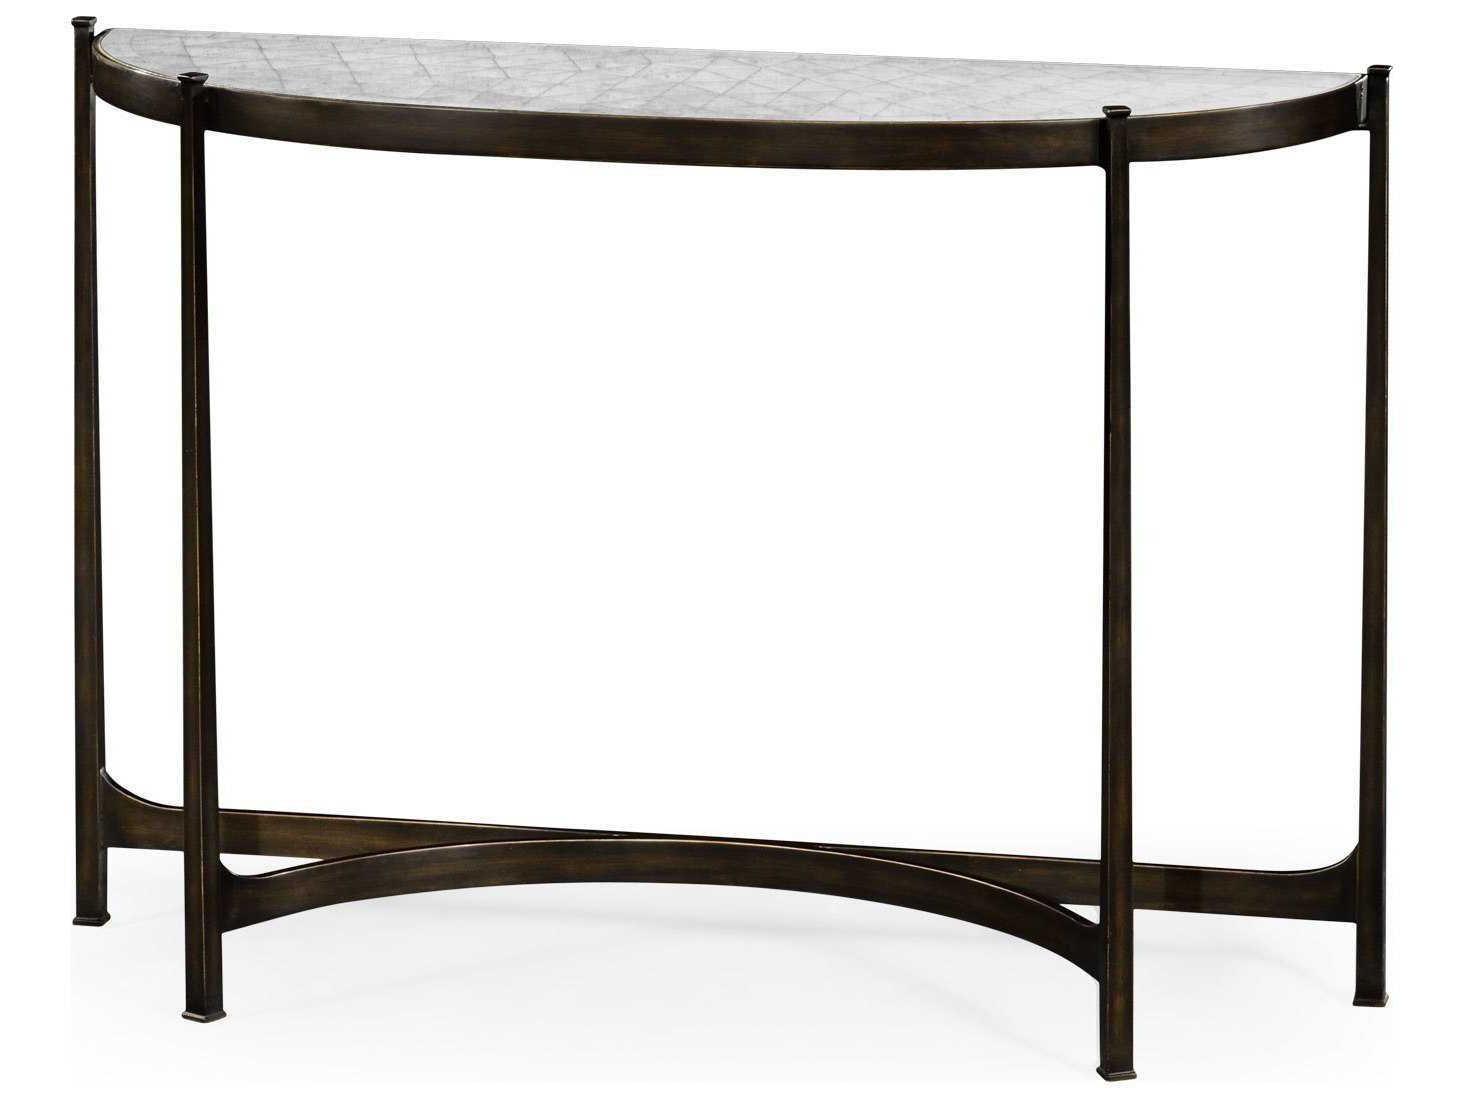 Antique Silver Aluminum Console Tables Regarding Most Current Jonathan Charles Luxe Antique Bronze Finish On Metal  (View 5 of 10)